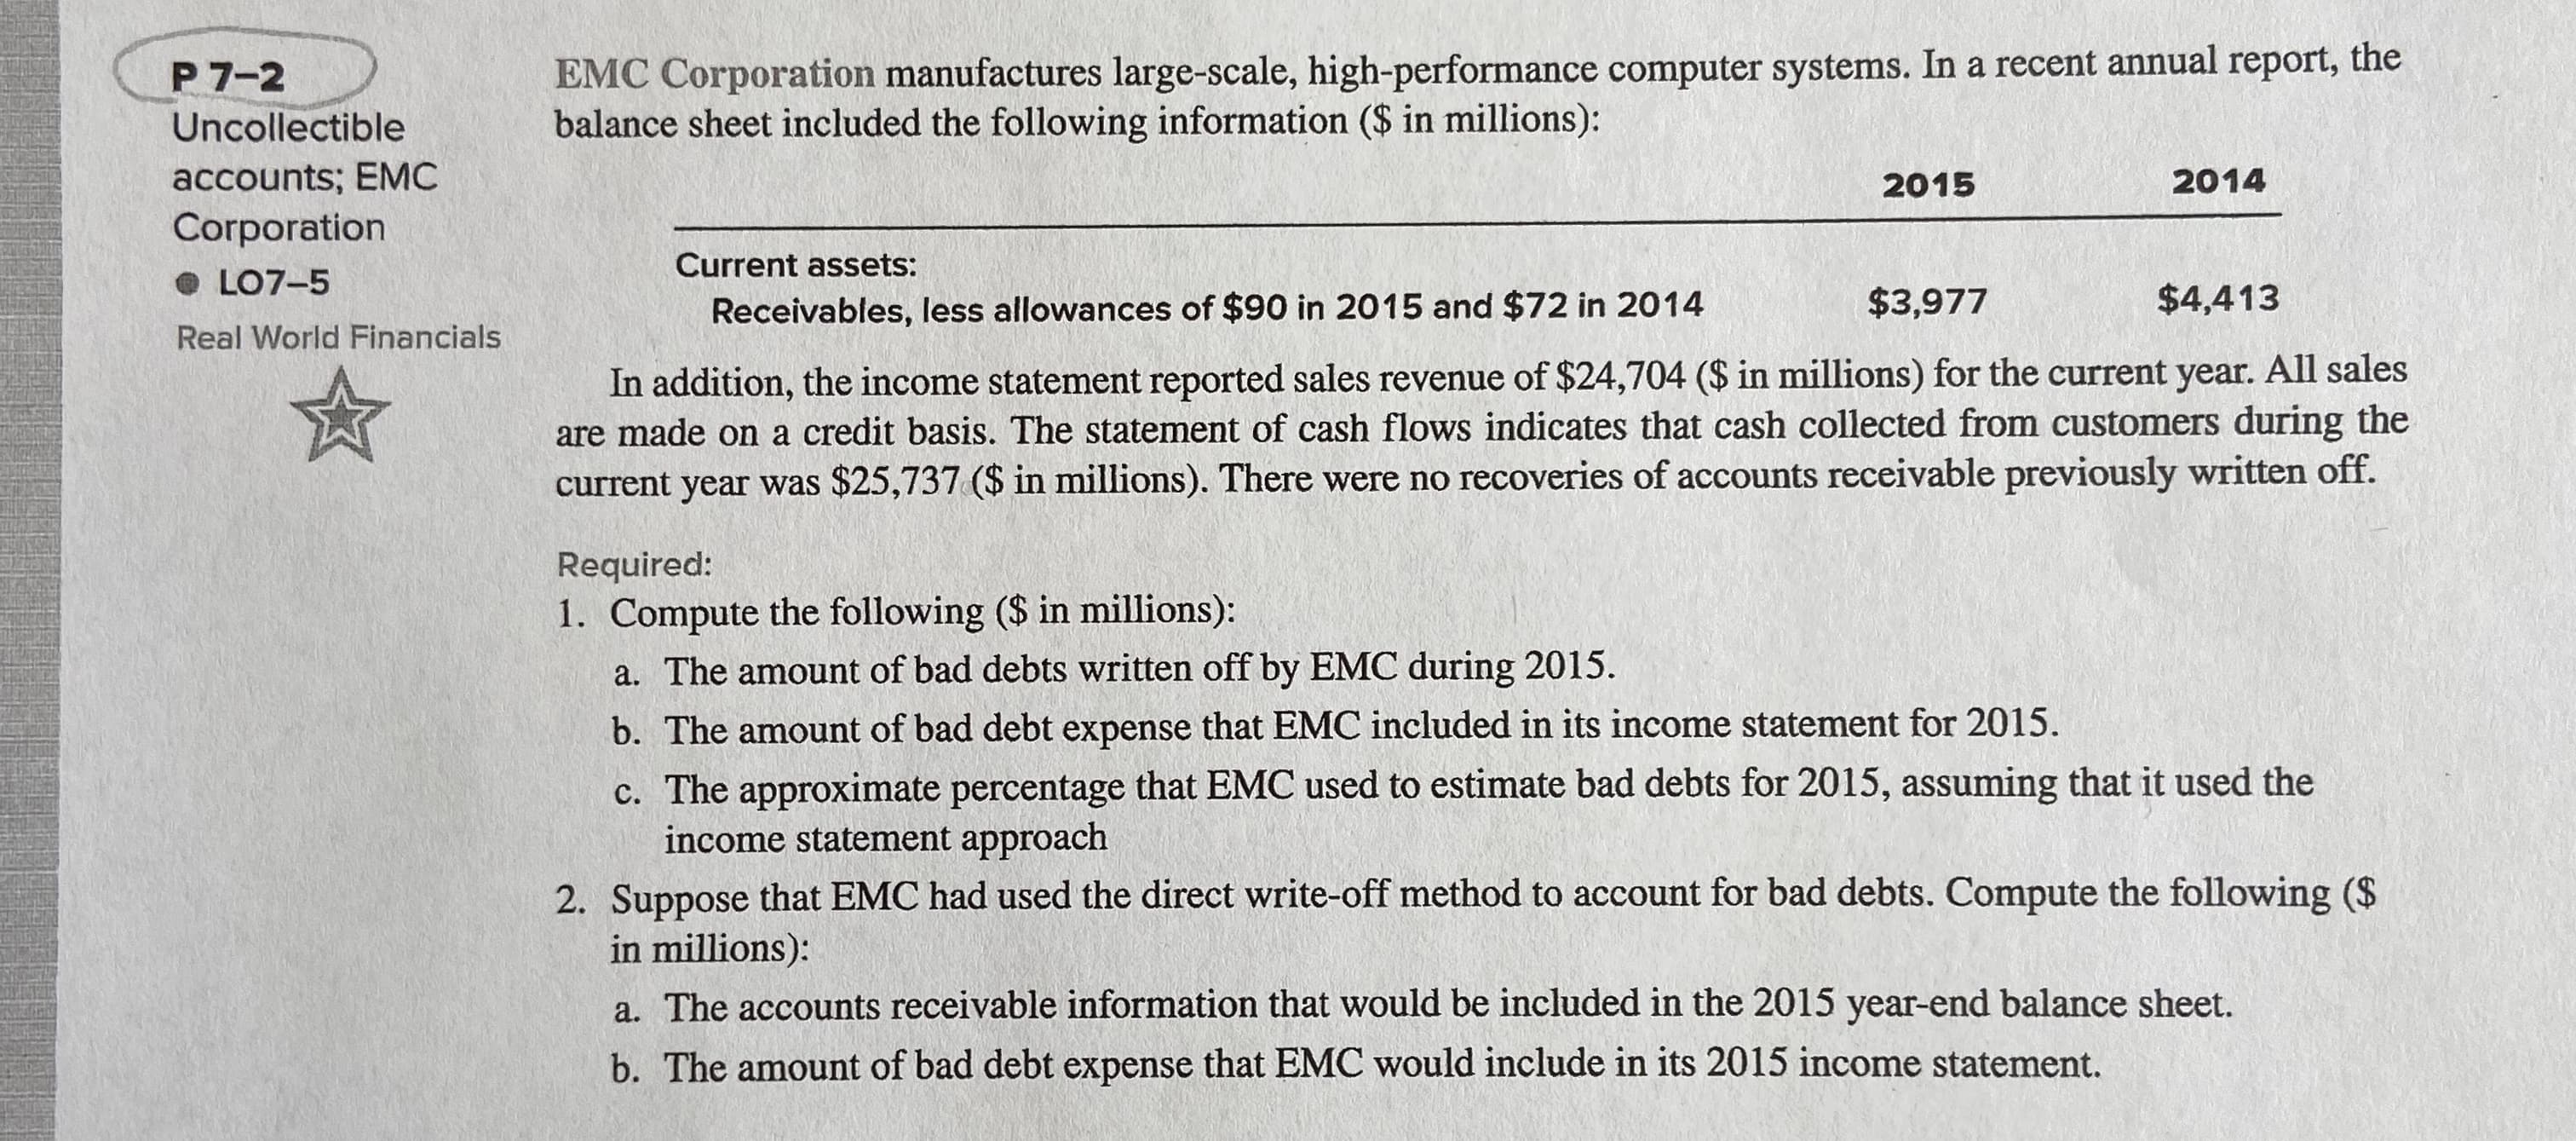 EMC Corporation manufactures large-scale, high-performance computer systems. In a recent annual report, the
balance sheet included the following information ($ in millions):
P 7-2
Uncollectible
accounts; EMC
2014
2015
Corporation
• LO7-5
Current assets:
$4,413
$3,977
Receivables, less allowances of $90 in 2015 and $72 in 2014
Real World Financials
In addition, the income statement reported sales revenue of $24,704 ($ in millions) for the current year. All sales
are made on a credit basis. The statement of cash flows indicates that cash collected from customers during the
current year was $25,737 ($ in millions). There were no recoveries of accounts receivable previously written off.
Required:
1. Compute the following ($ in millions):
a. The amount of bad debts written off by EMC during 2015.
b. The amount of bad debt expense that EMC included in its income statement for 2015.
c. The approximate percentage that EMC used to estimate bad debts for 2015, assuming that it used the
income statement approach
2. Suppose that EMC had used the direct write-off method to account for bad debts. Compute the following ($
in millions):
a. The accounts receivable information that would be included in the 2015 year-end balance sheet.
b. The amount of bad debt expense that EMC would include in its 2015 income statement.
